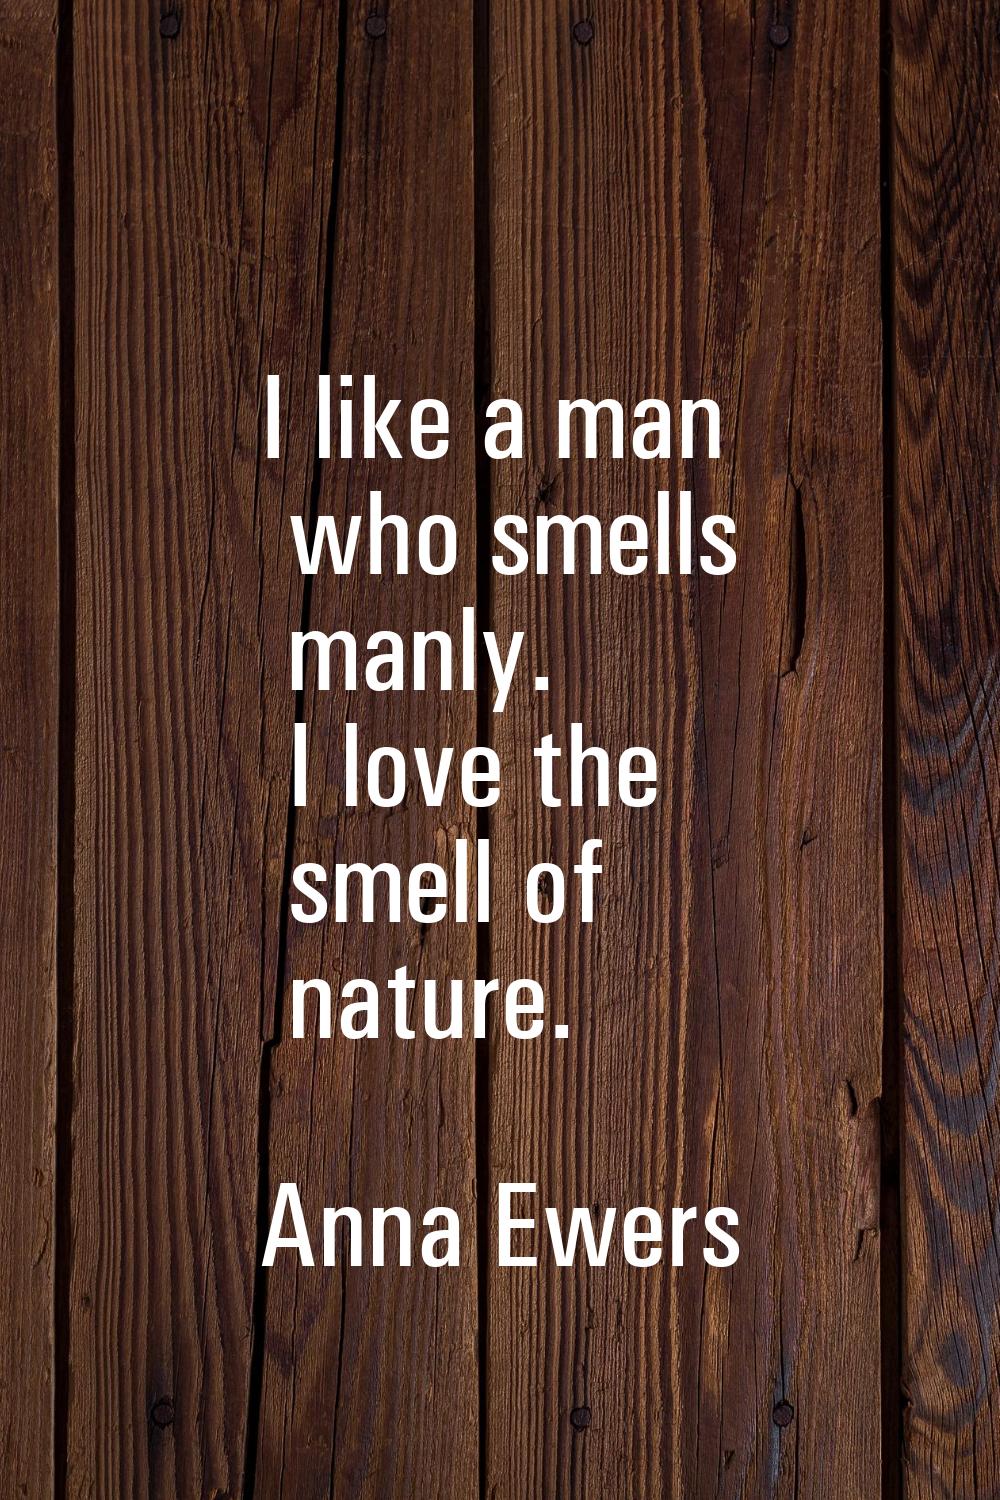 I like a man who smells manly. I love the smell of nature.